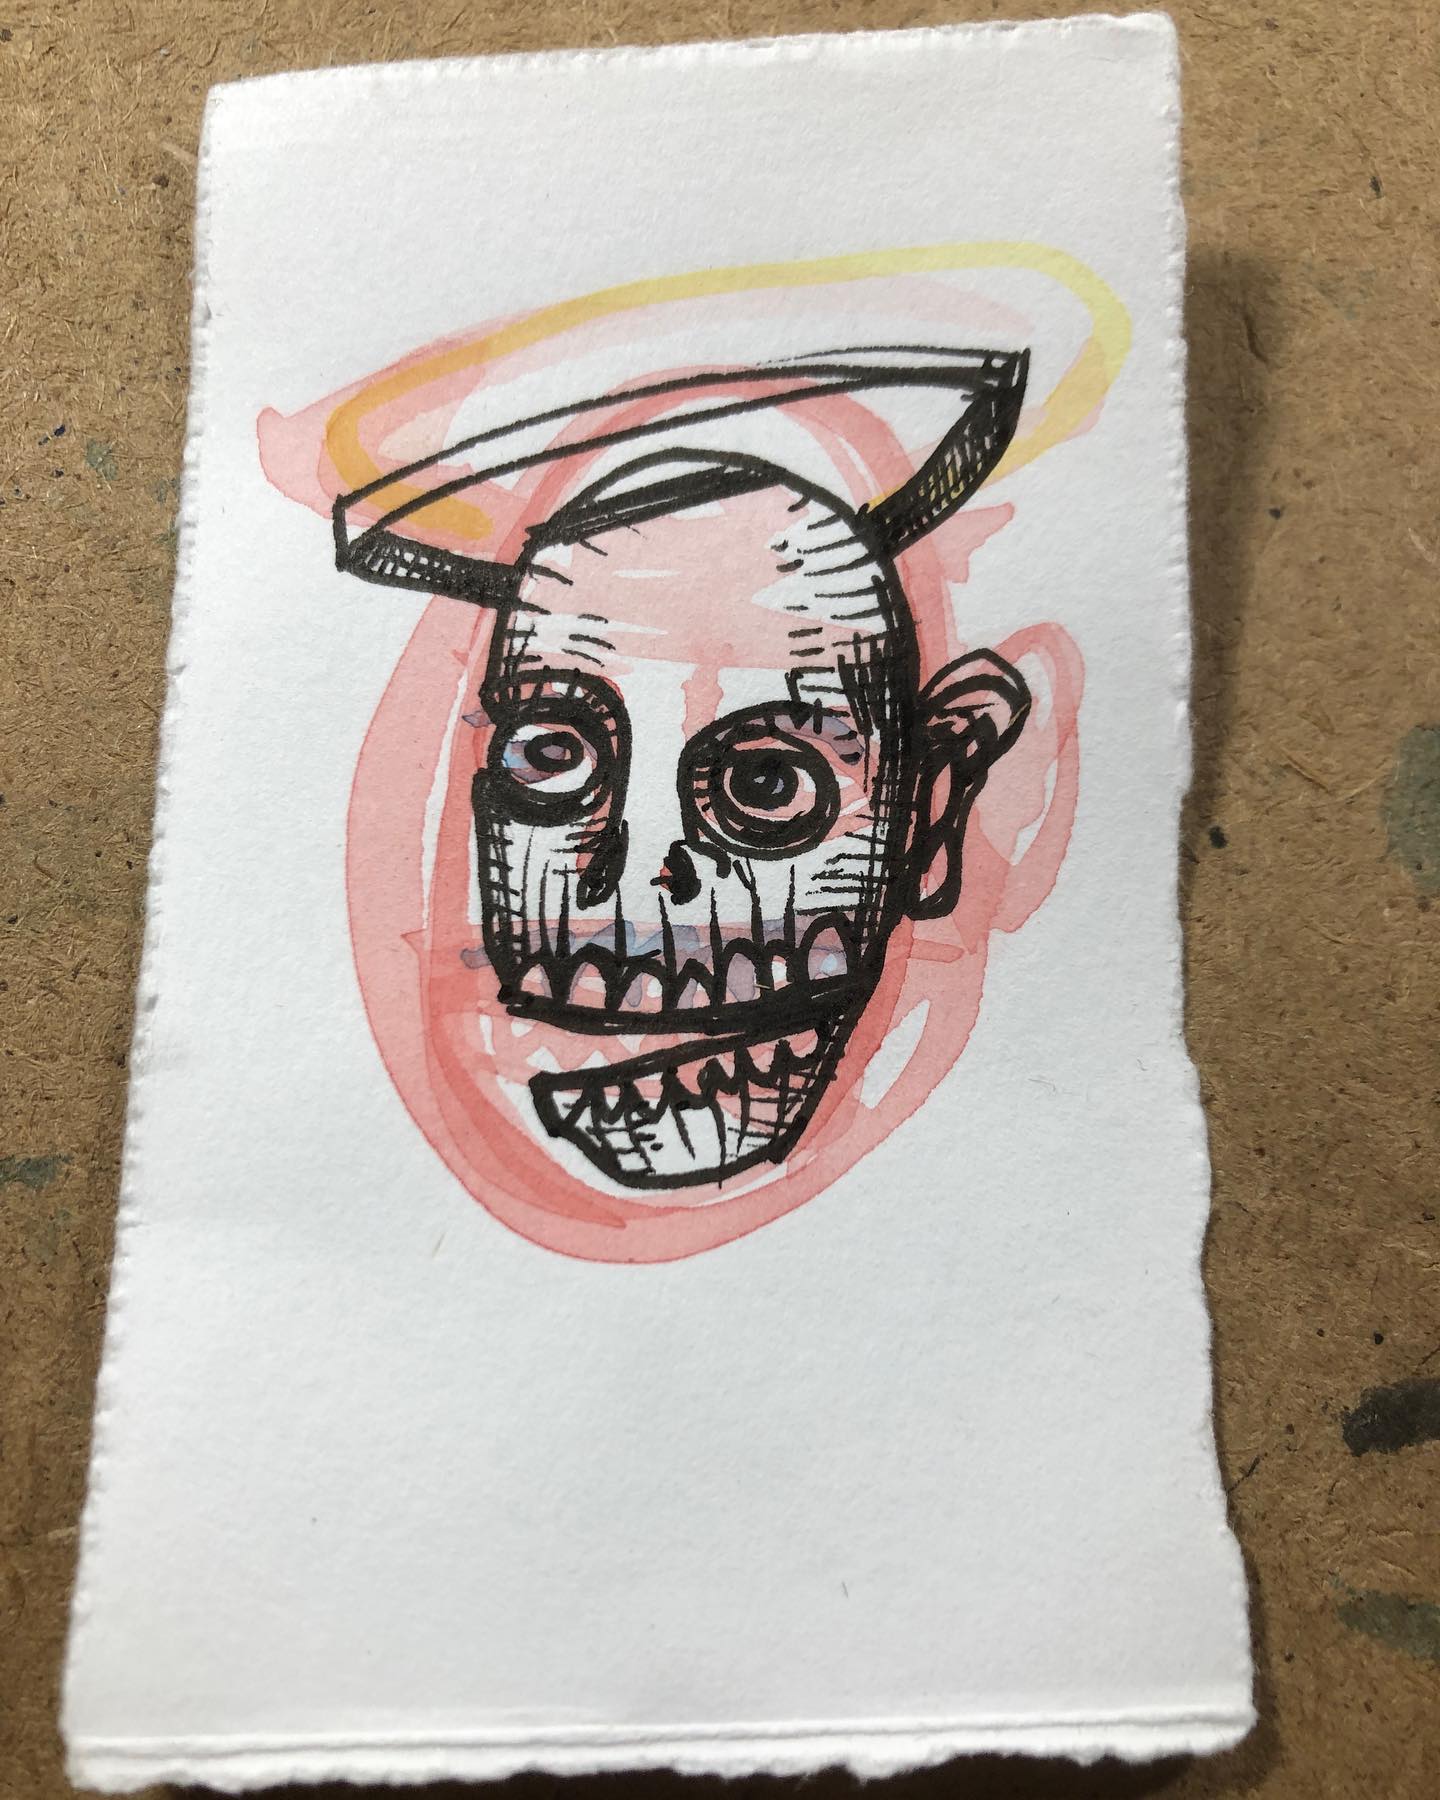 Ink and watercolor drawing of a skull with halo